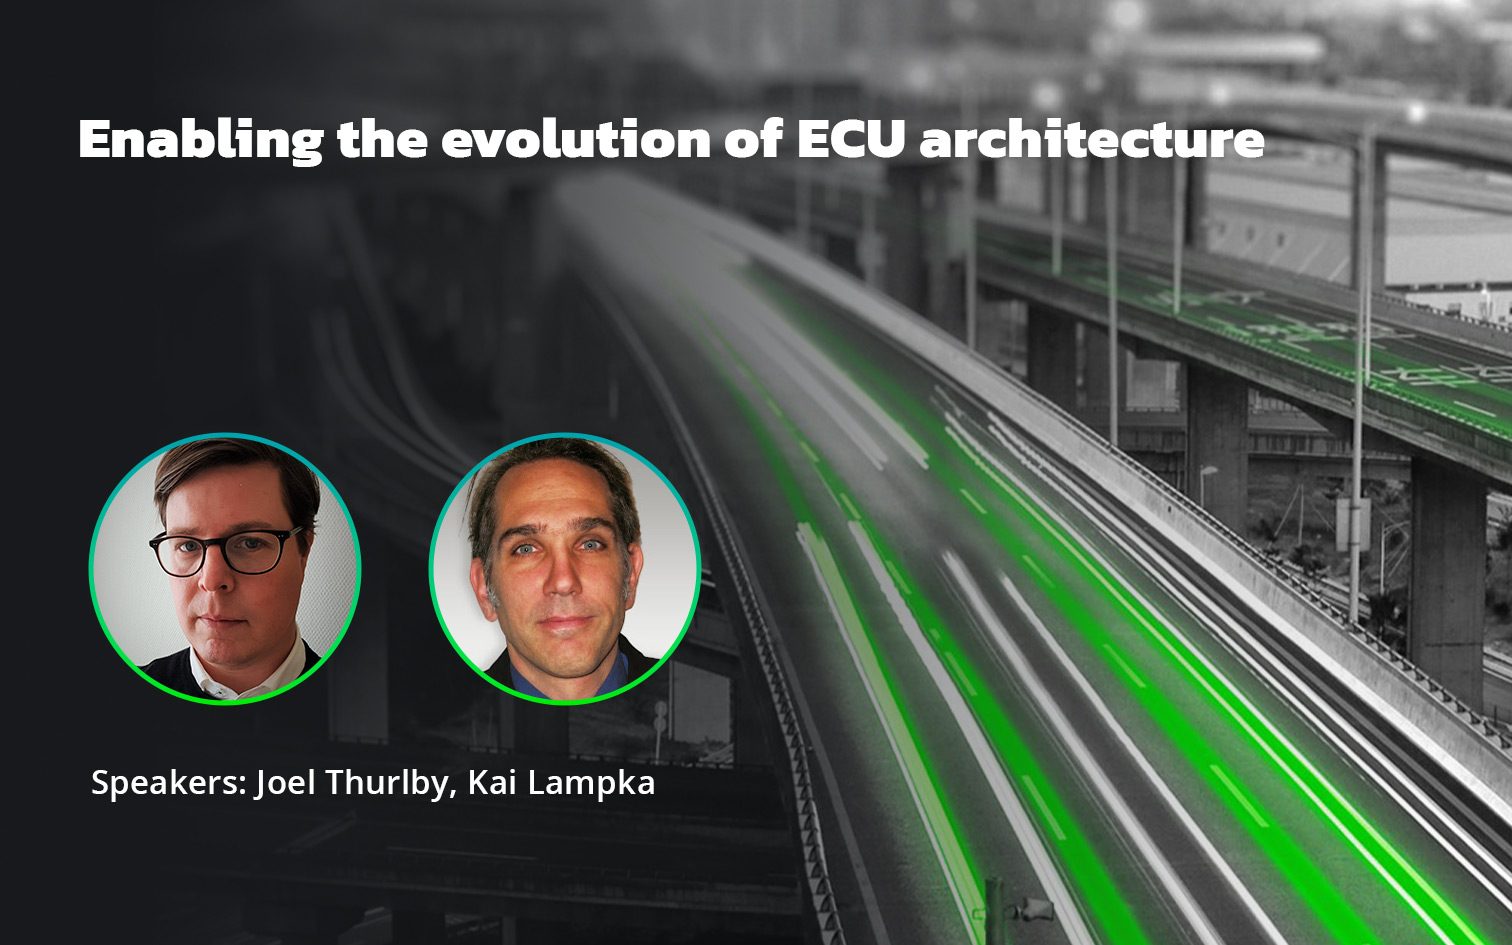 Enabling the evolution of ECU architecture